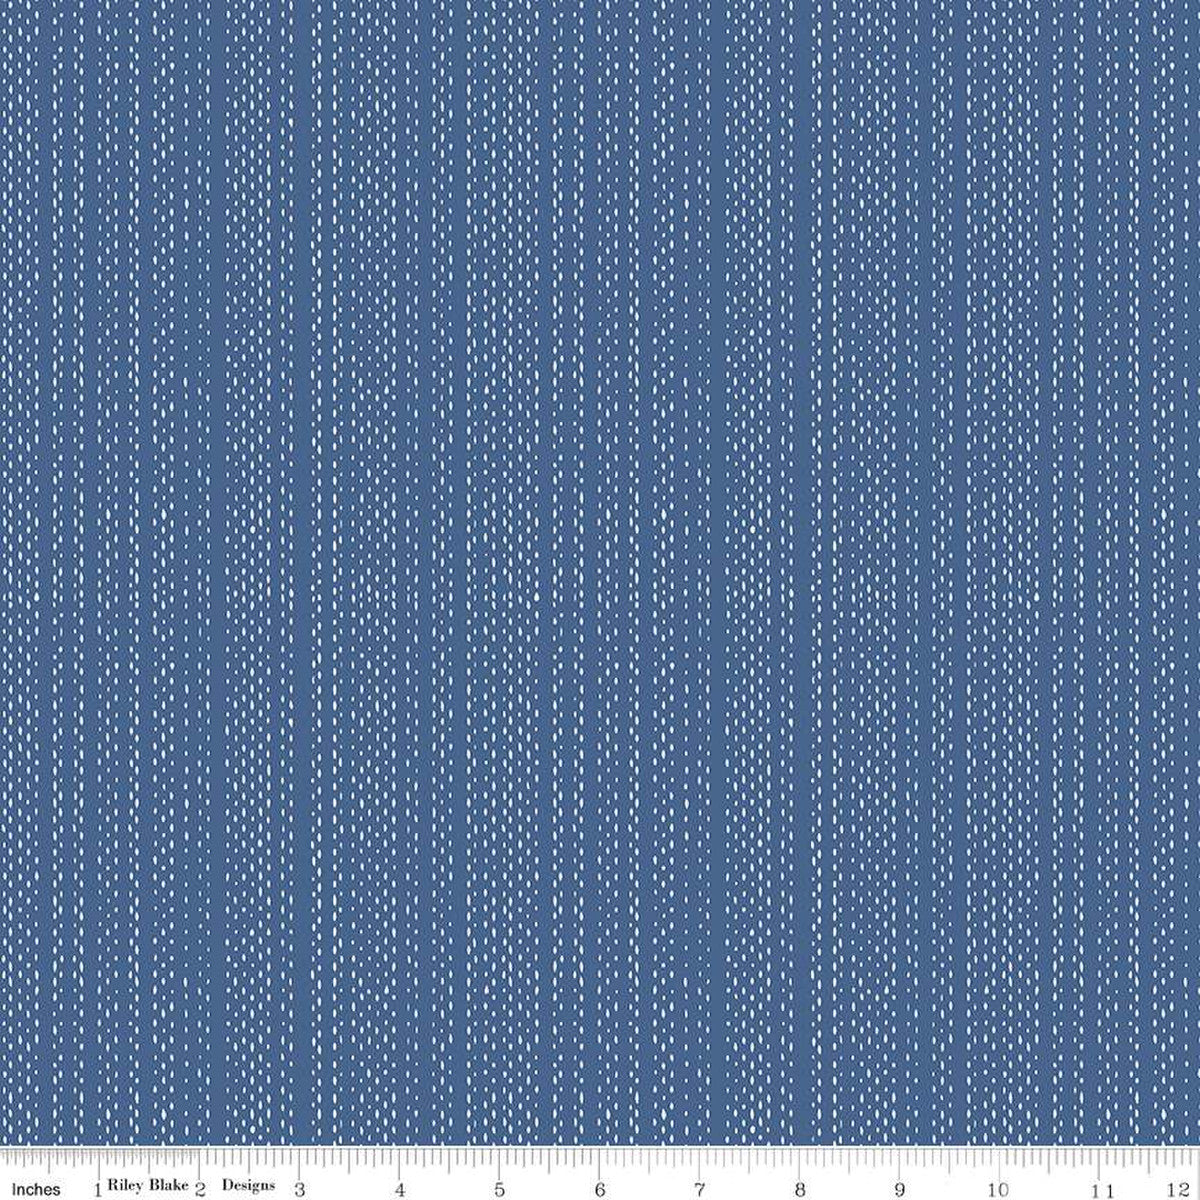 Manufacturer: Riley Blake Designs Designer: Fran Gulick of Cotton and Joy Collection: Moonchild Print Name: Signals in Denim Material: 100% Cotton Weight: Quilting SKU: SC13826-DENIM Width: 44 inches